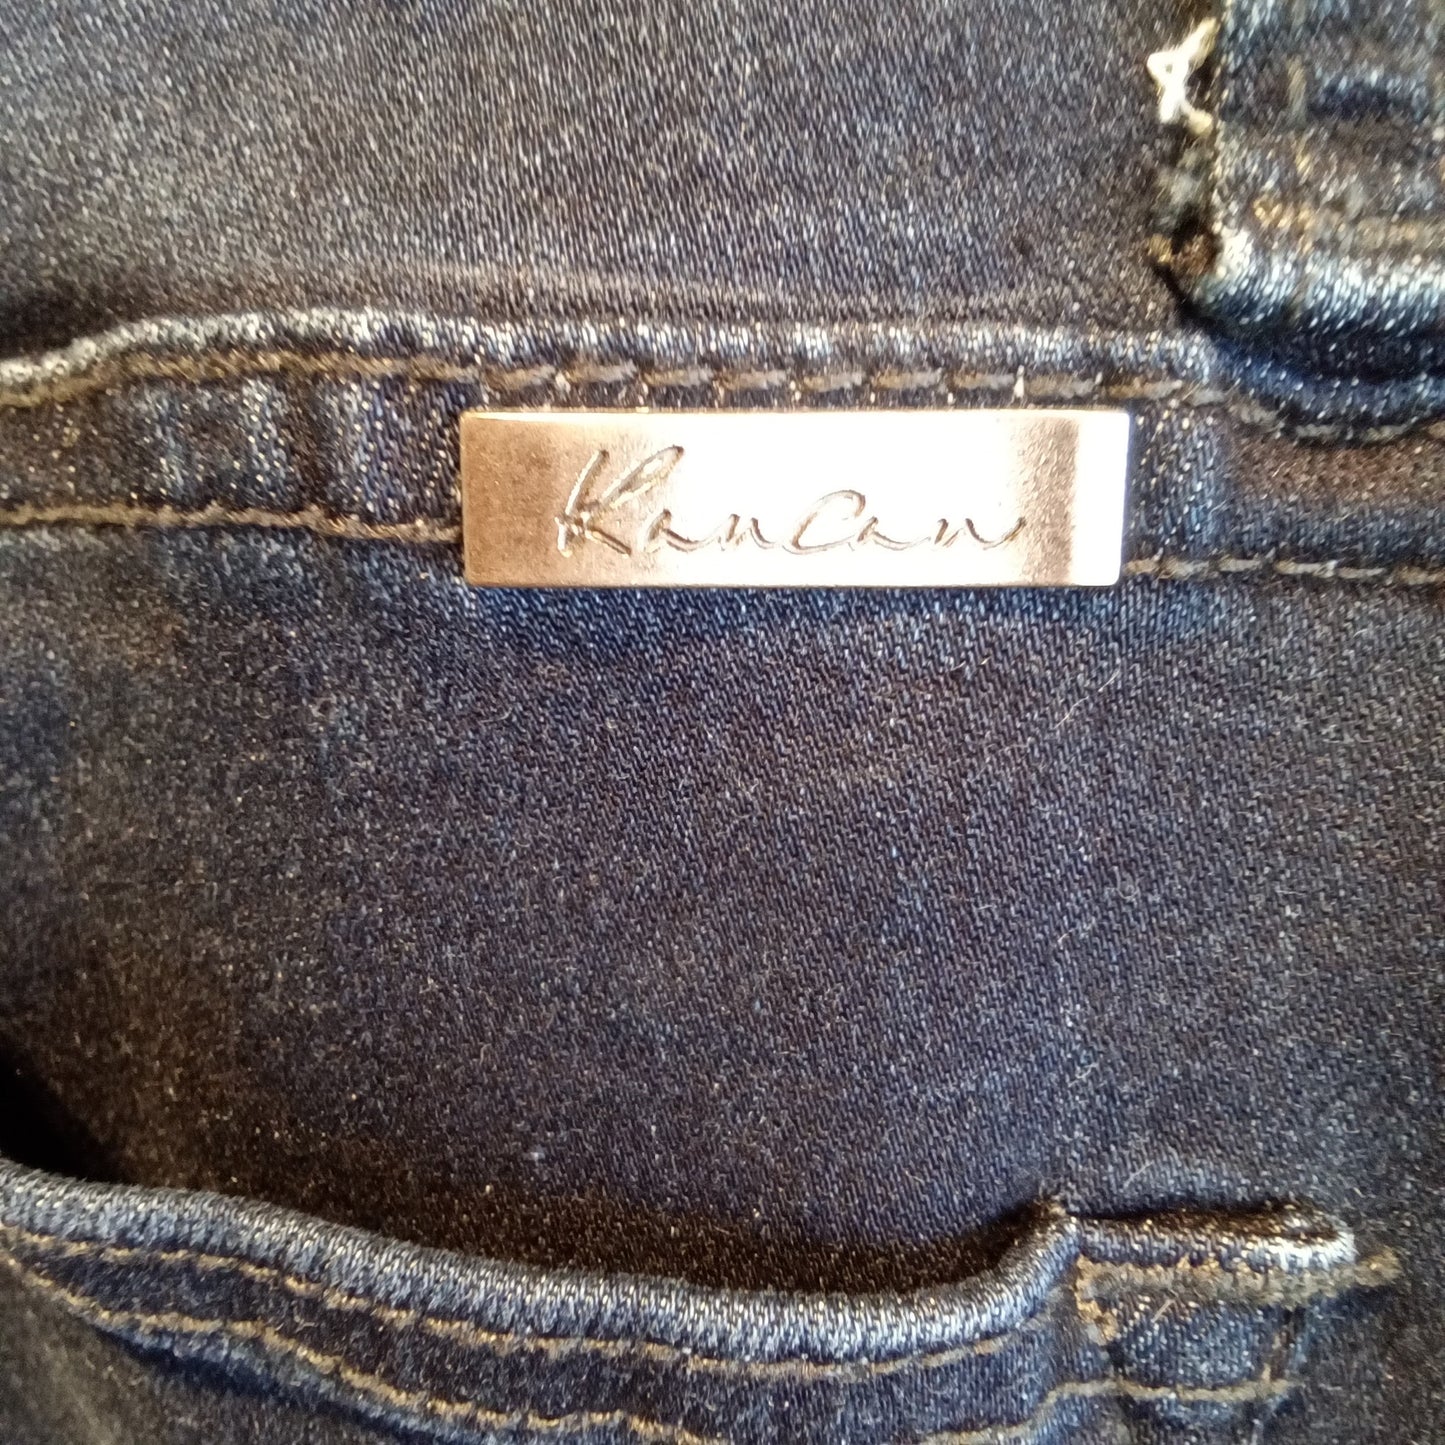 Kan Can Flare Jeans Size 29